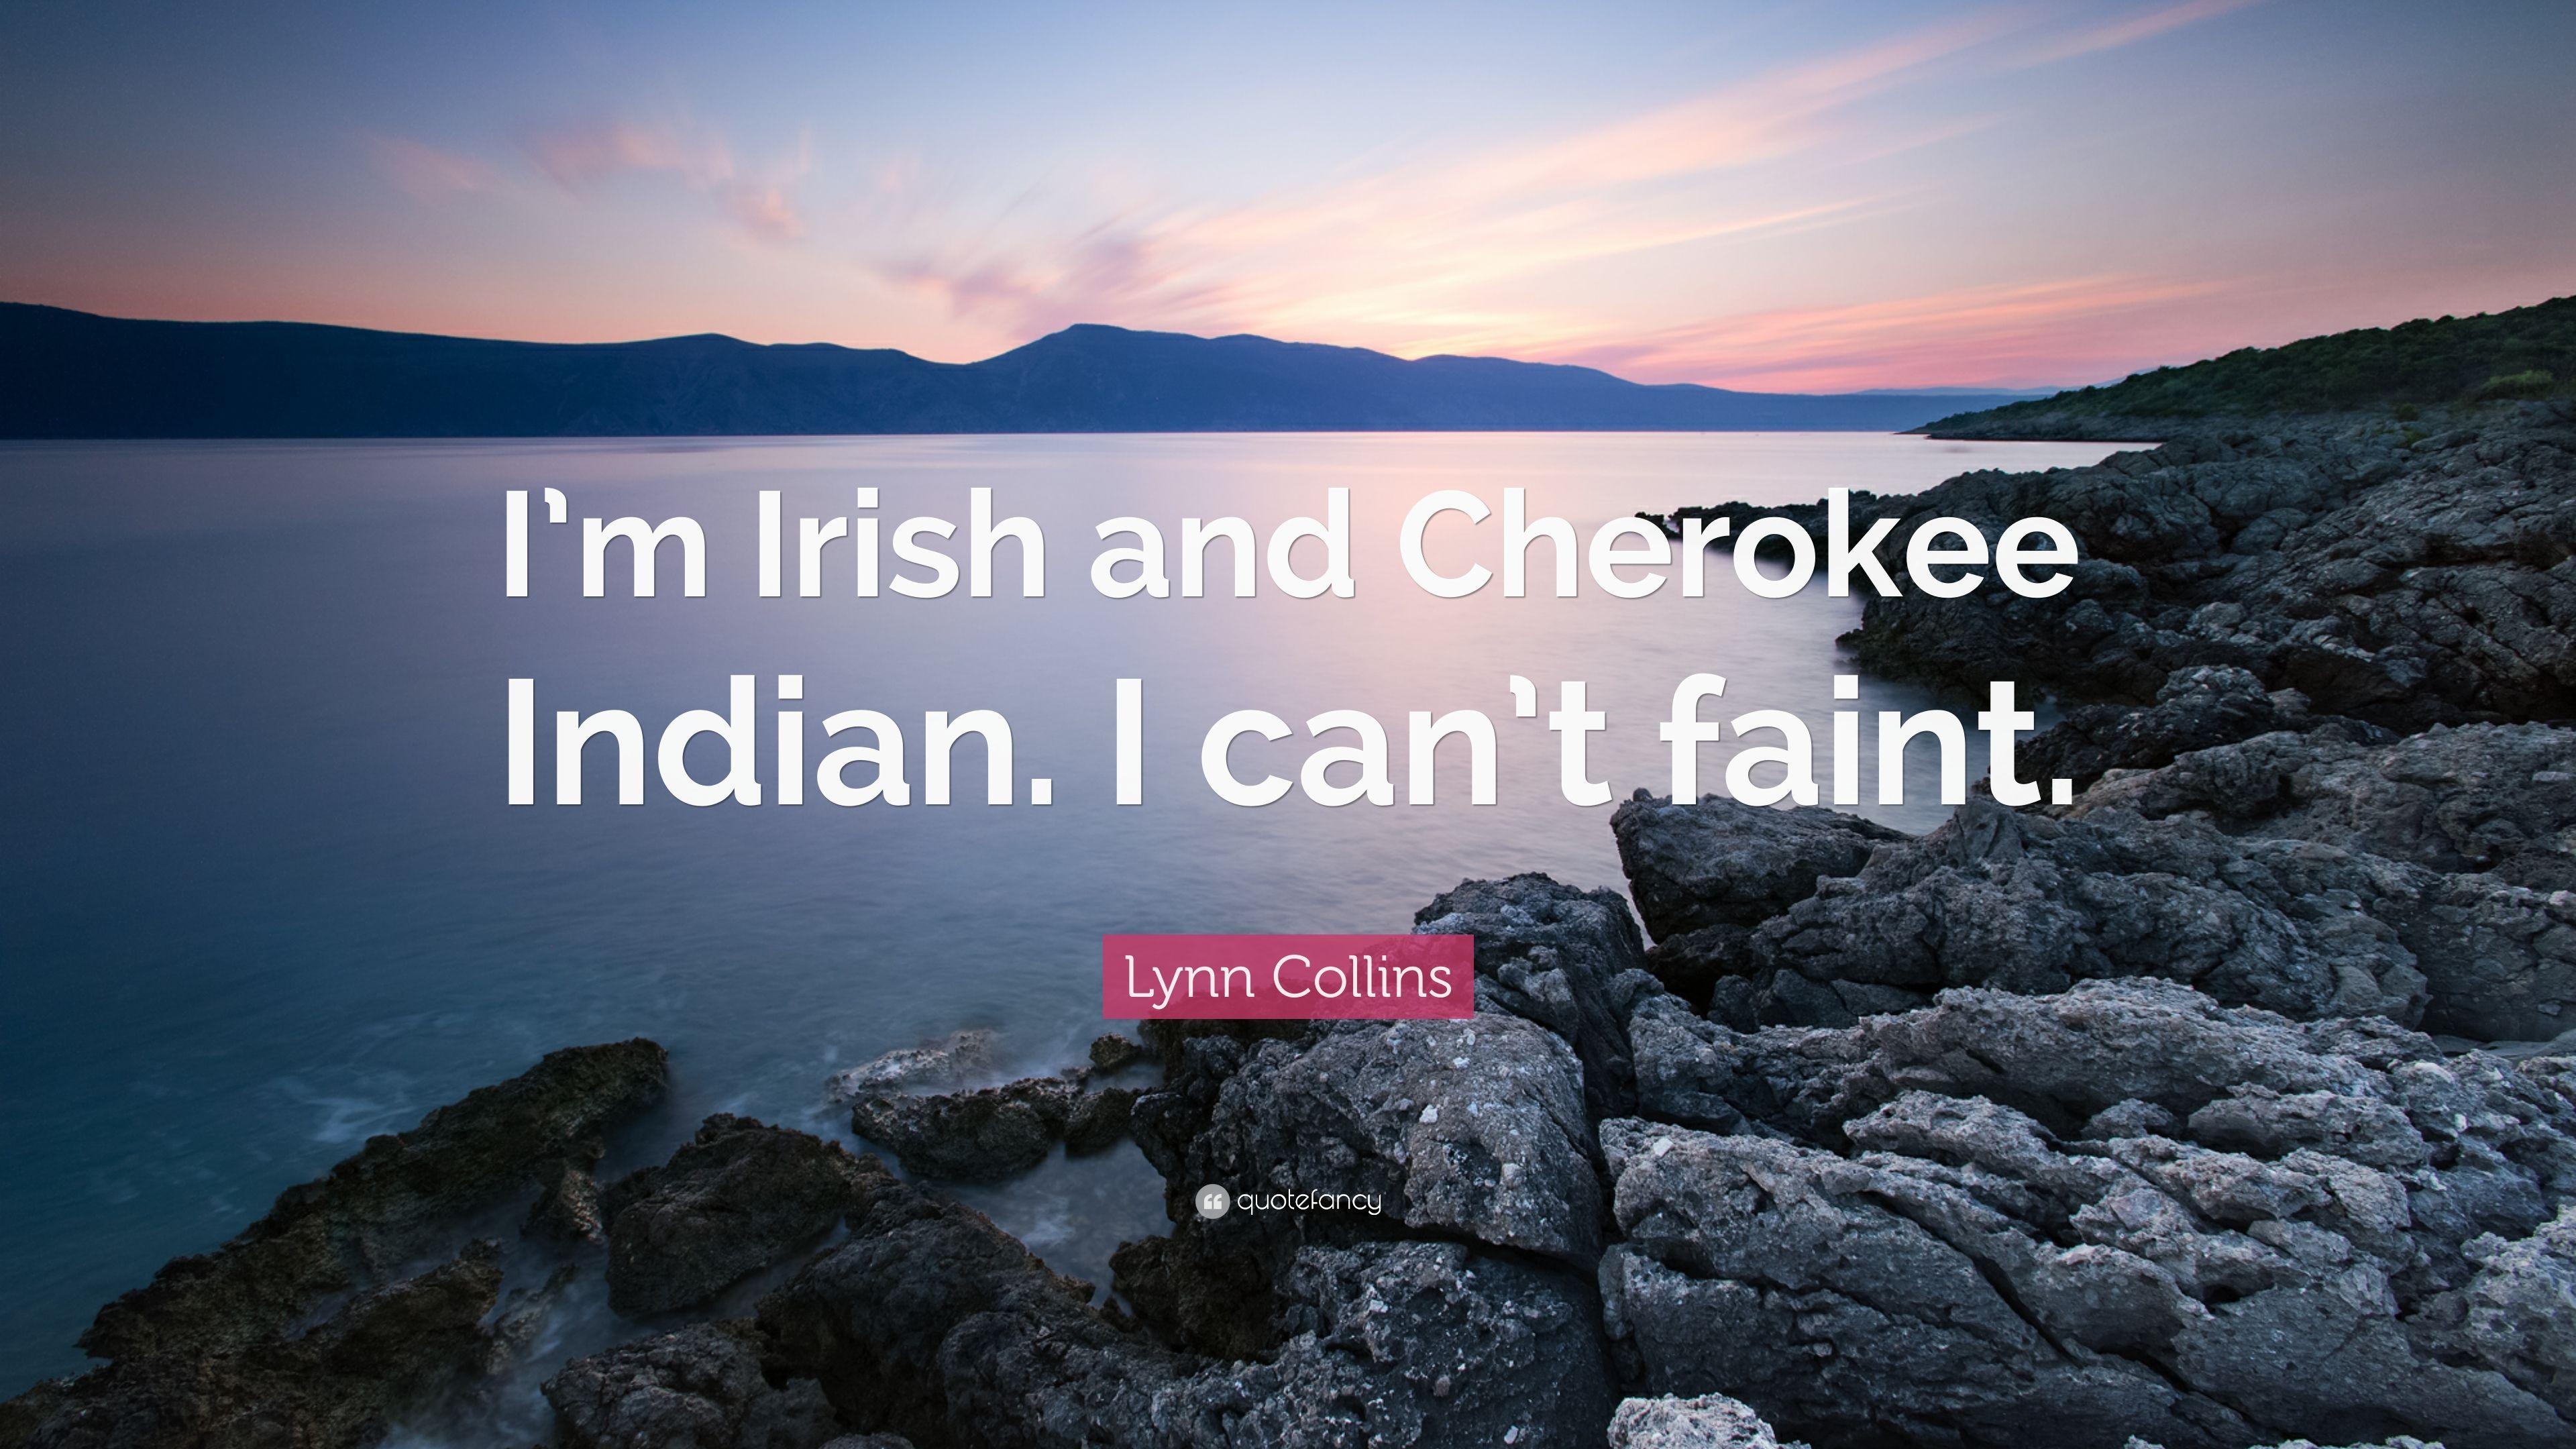 Lynn Collins Quote: “I'm Irish and Cherokee Indian. I can't faint